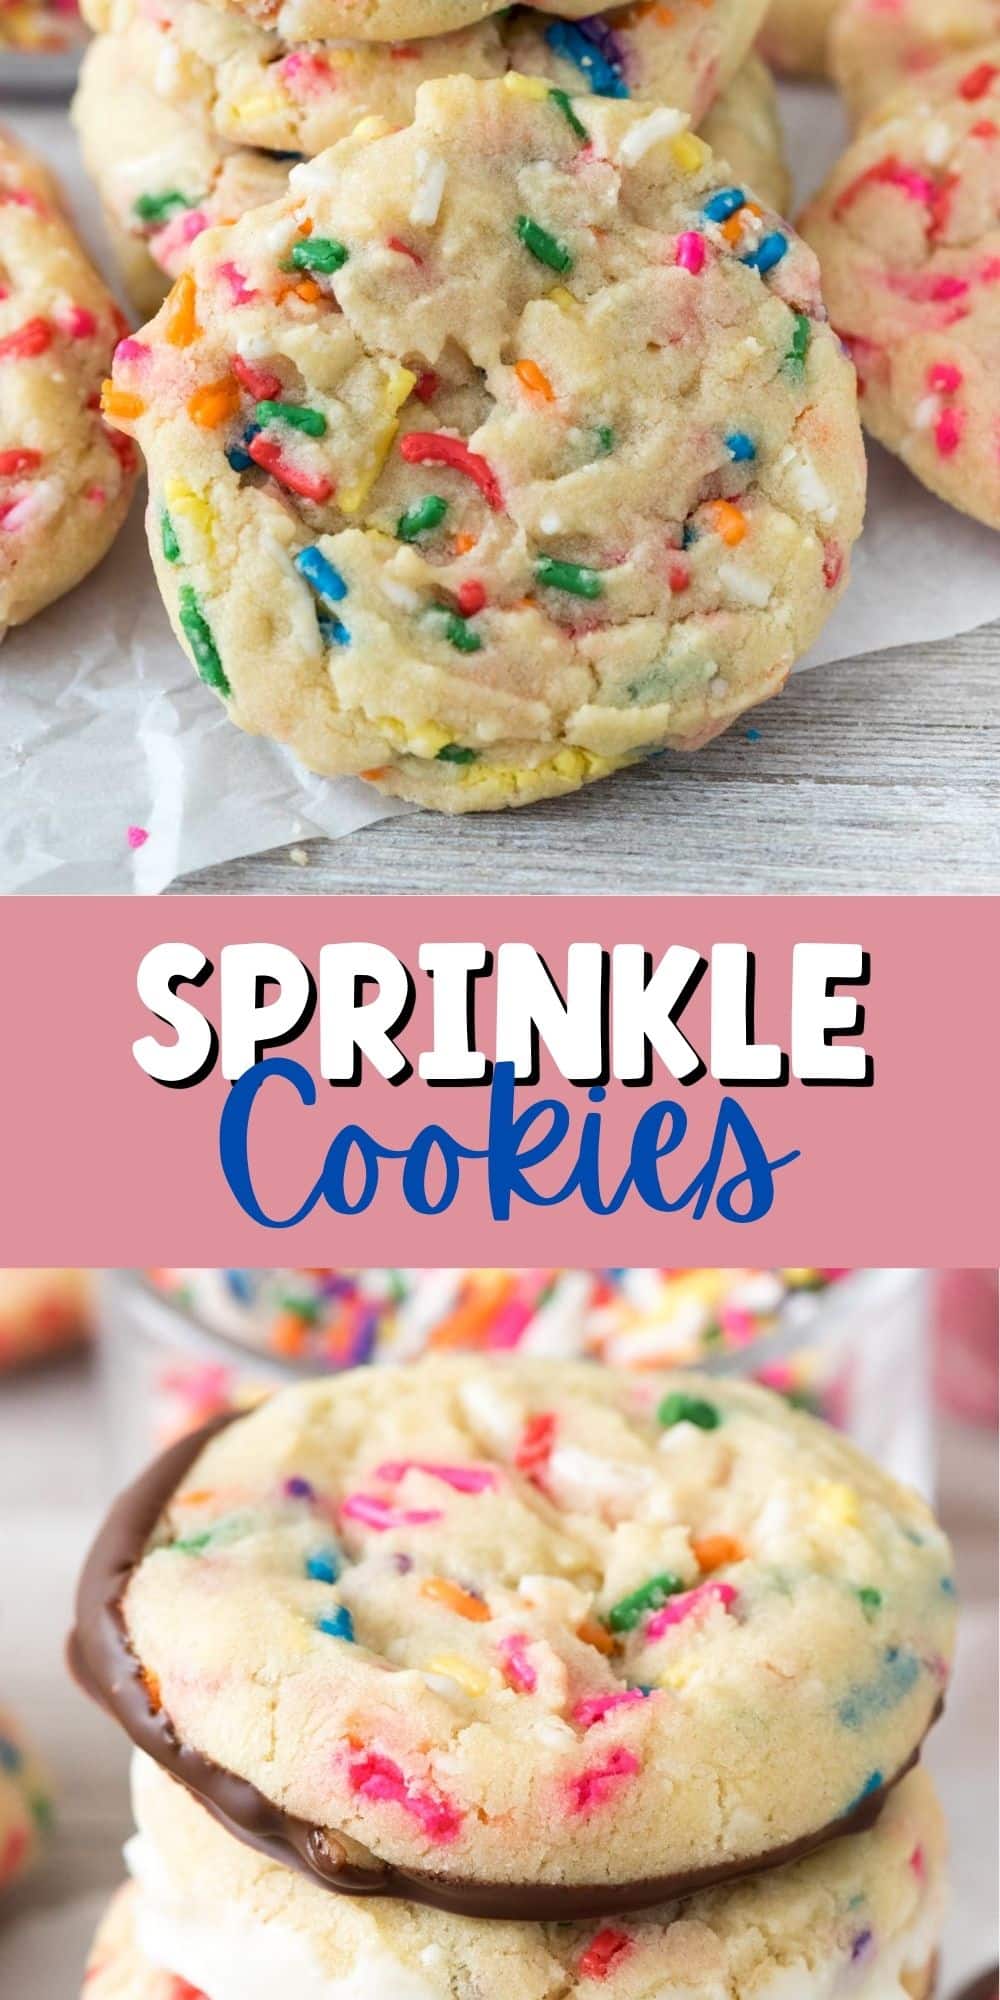 two photos of cookies with rainbow sprinkles baked inside and words in the middle